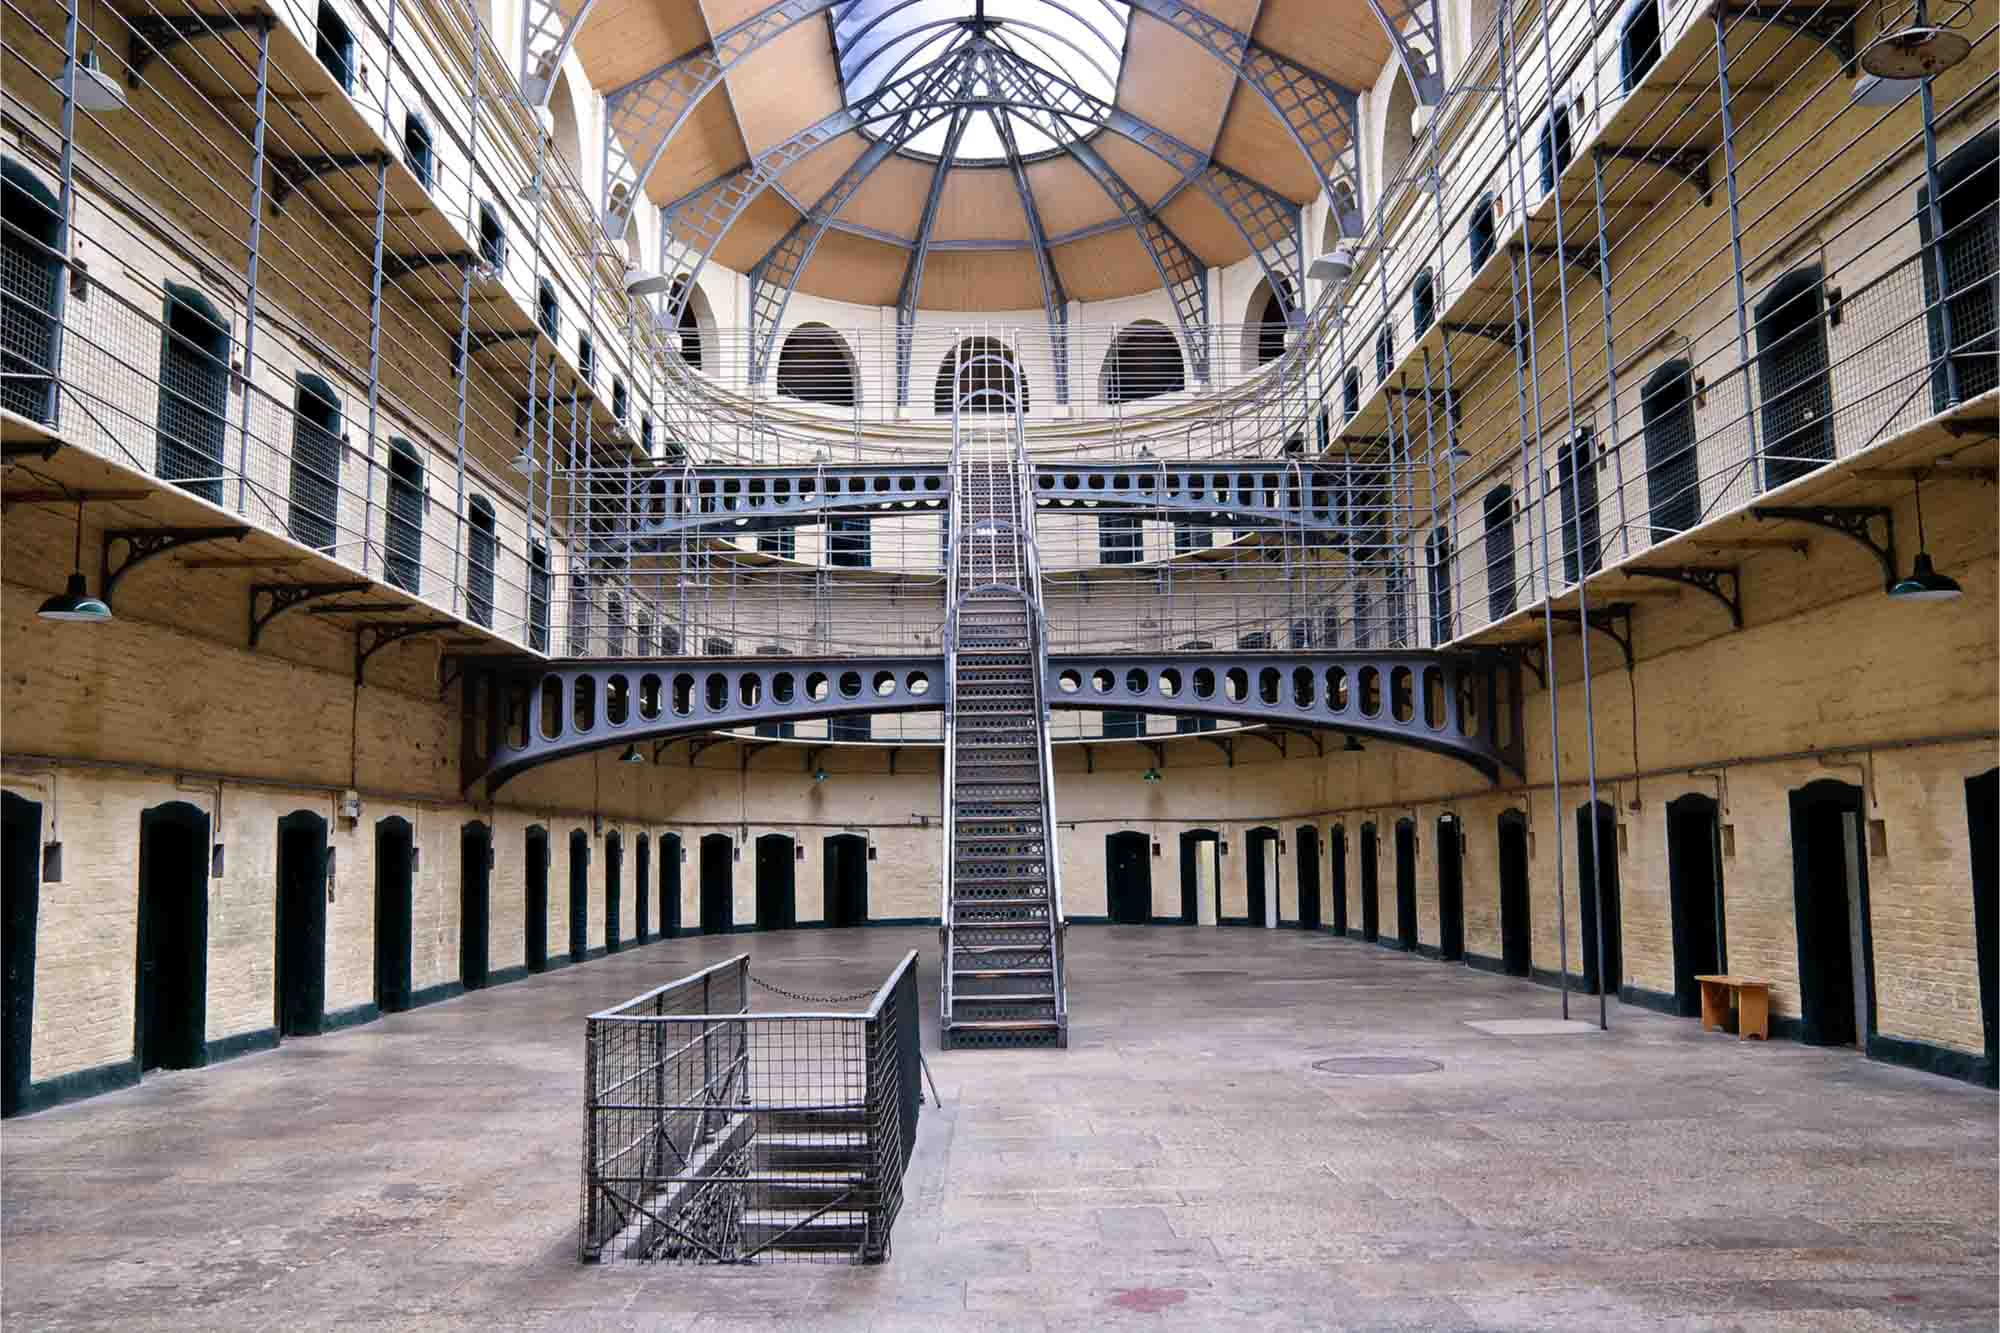 Several floors of jail cells surrounding a central courtyard